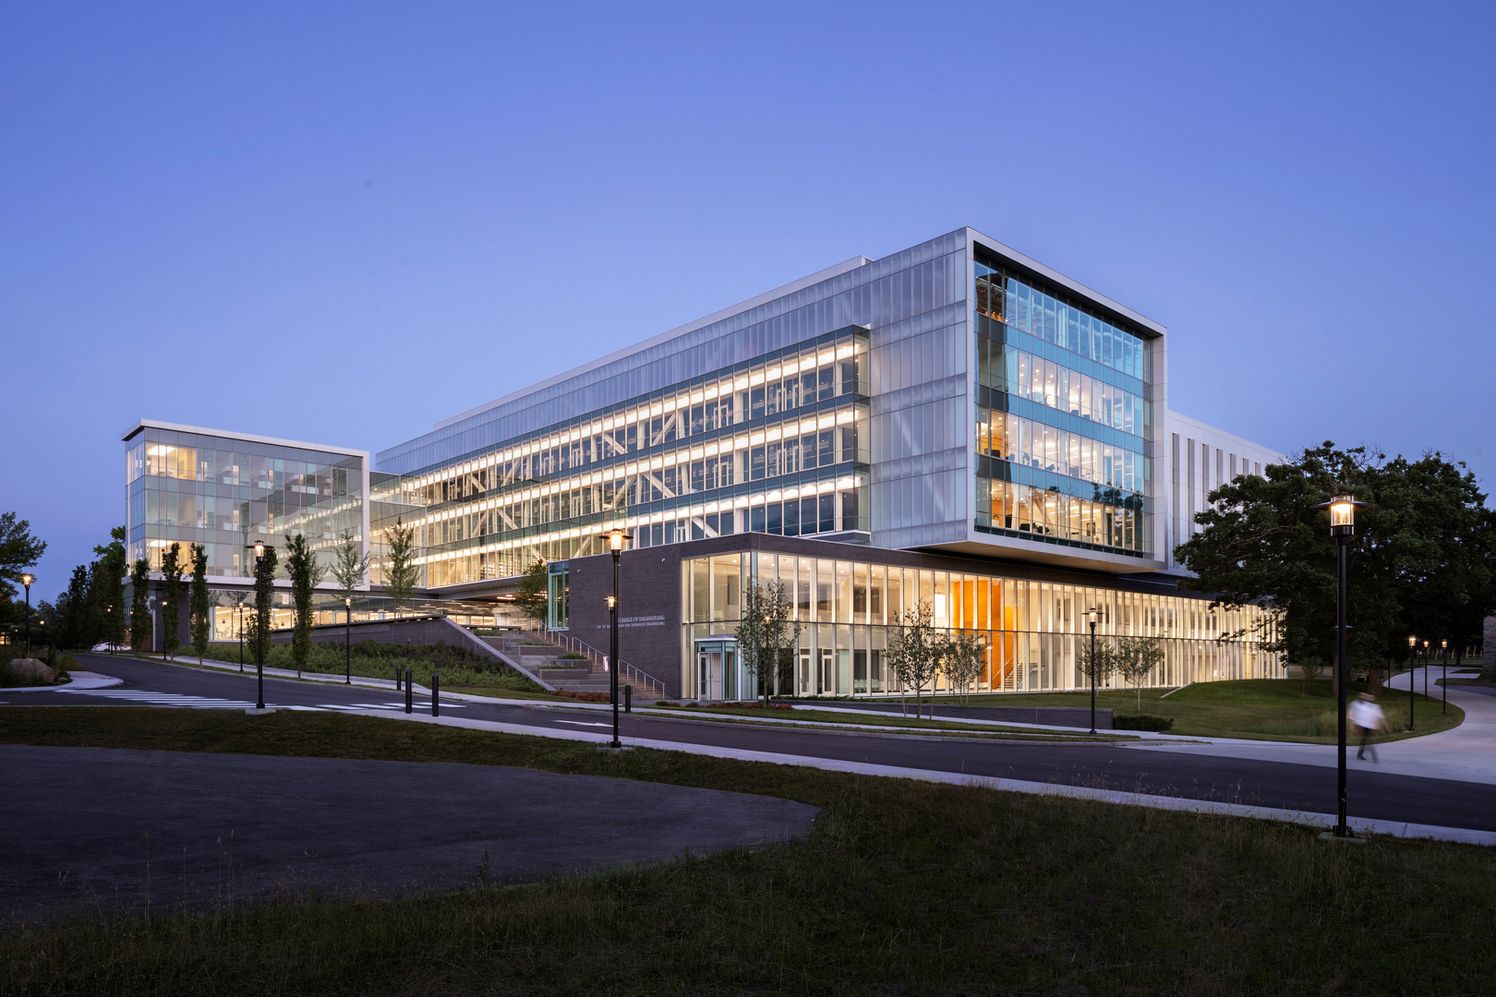 Exterior of Fascitelli Center for Advanced Engineering at University of Rhode Island at dusk